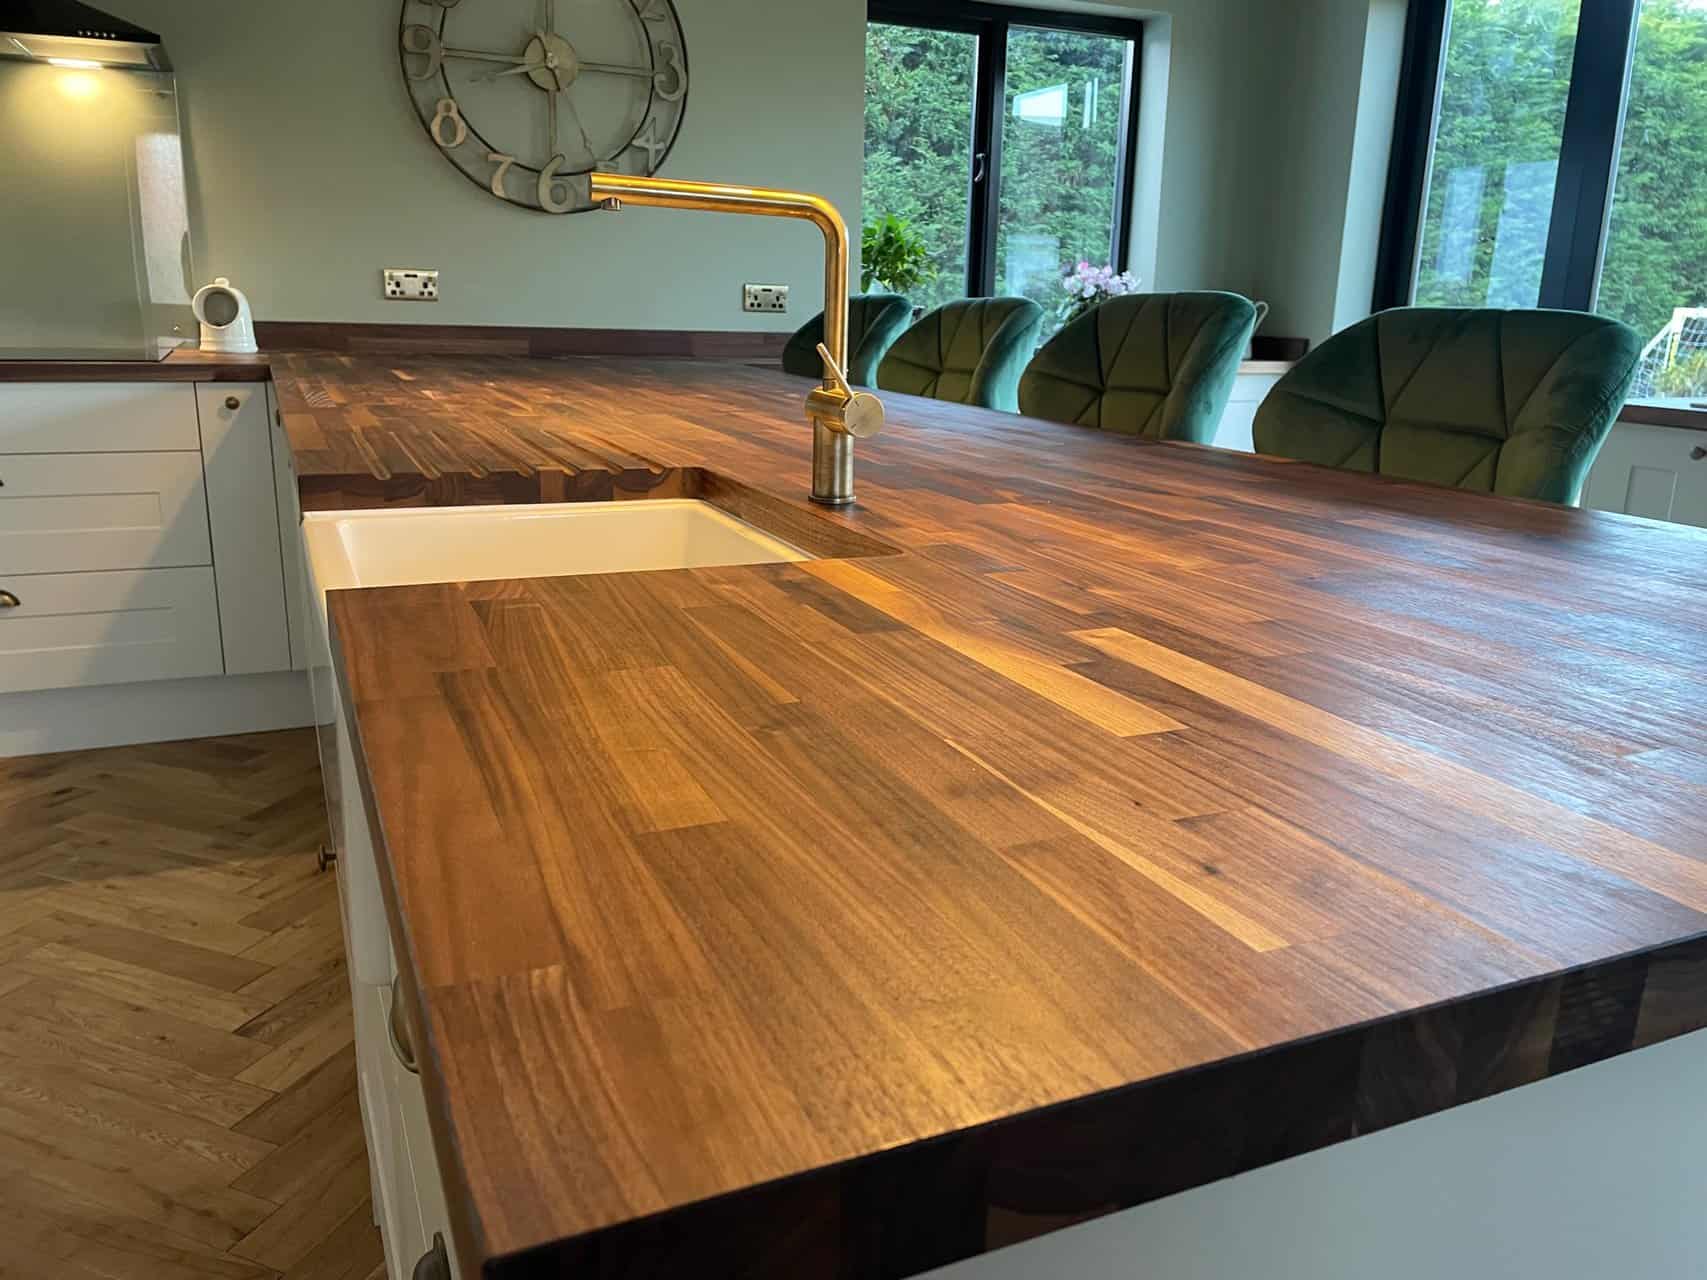 The Rich History of Woodworking: Celebrating the Craftsmanship Behind Wood Worktops